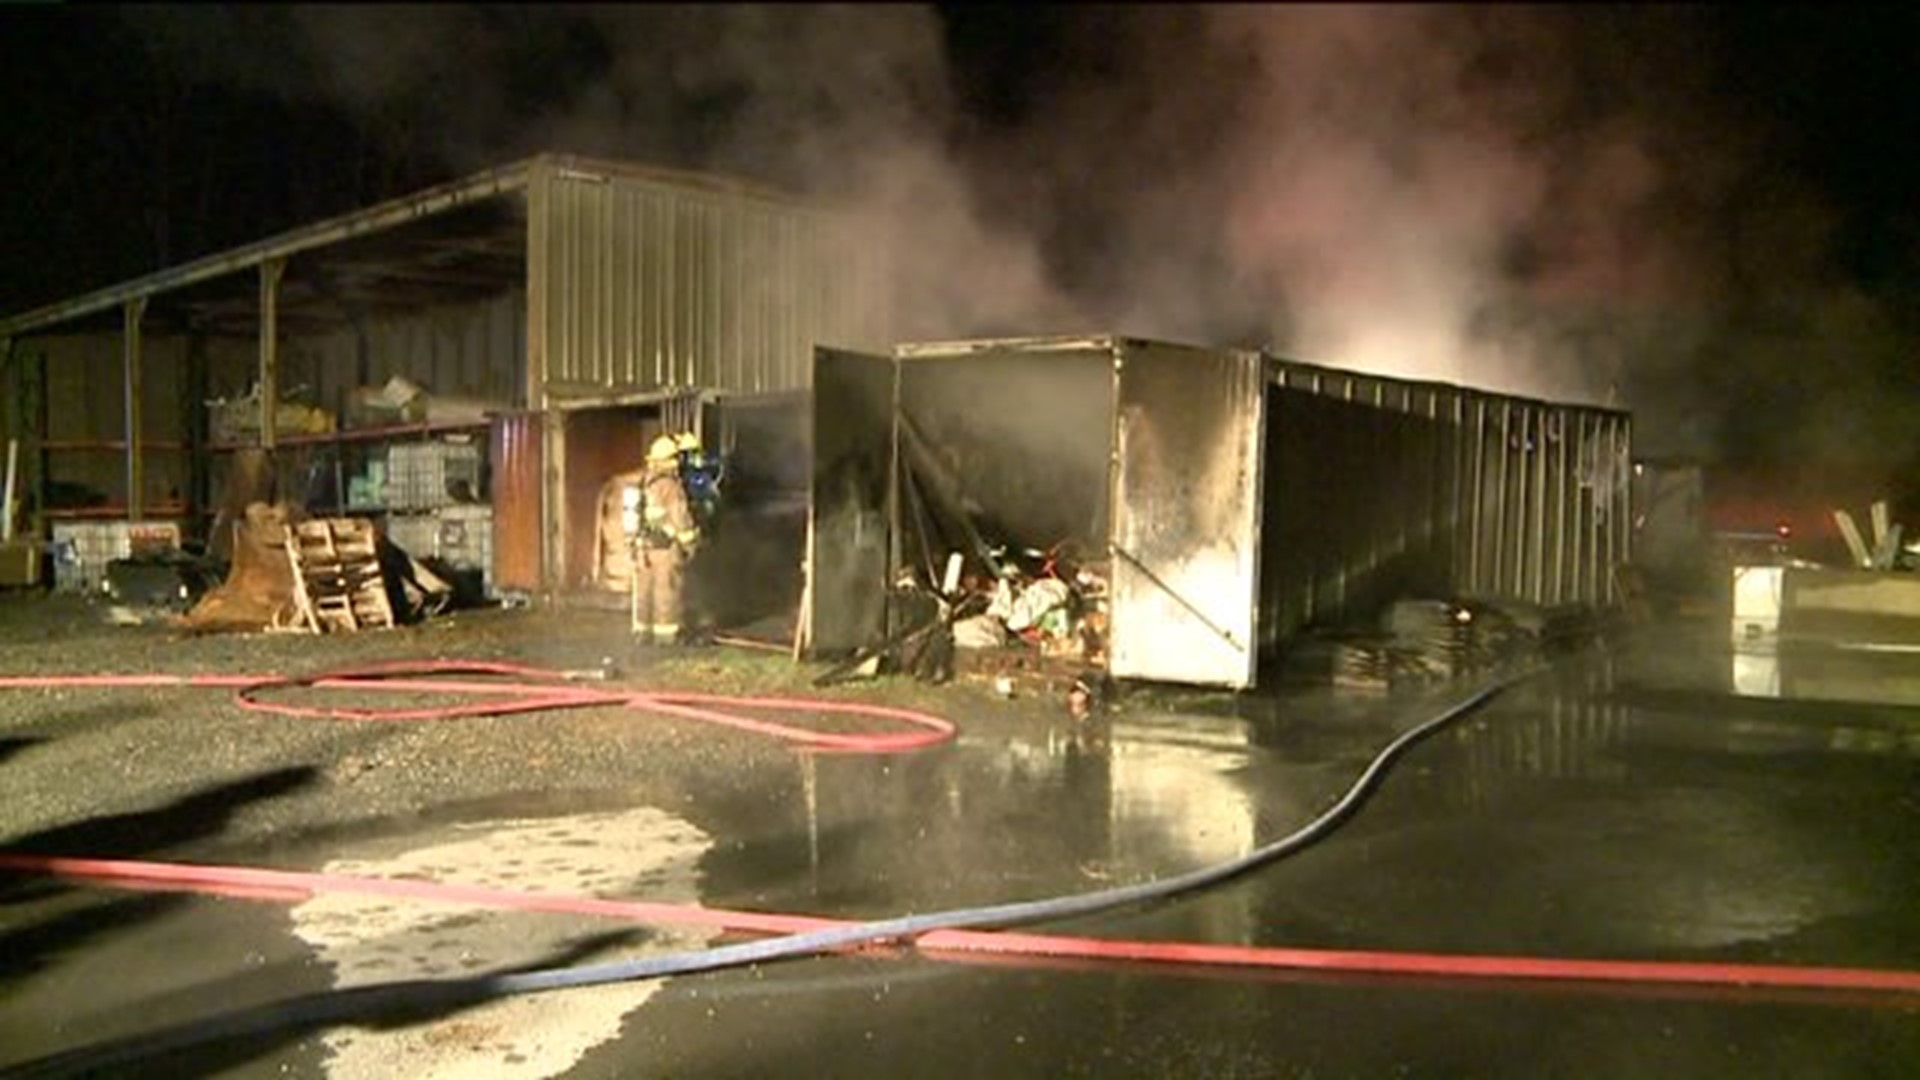 Machinery Catches Fire at Landscaping Business